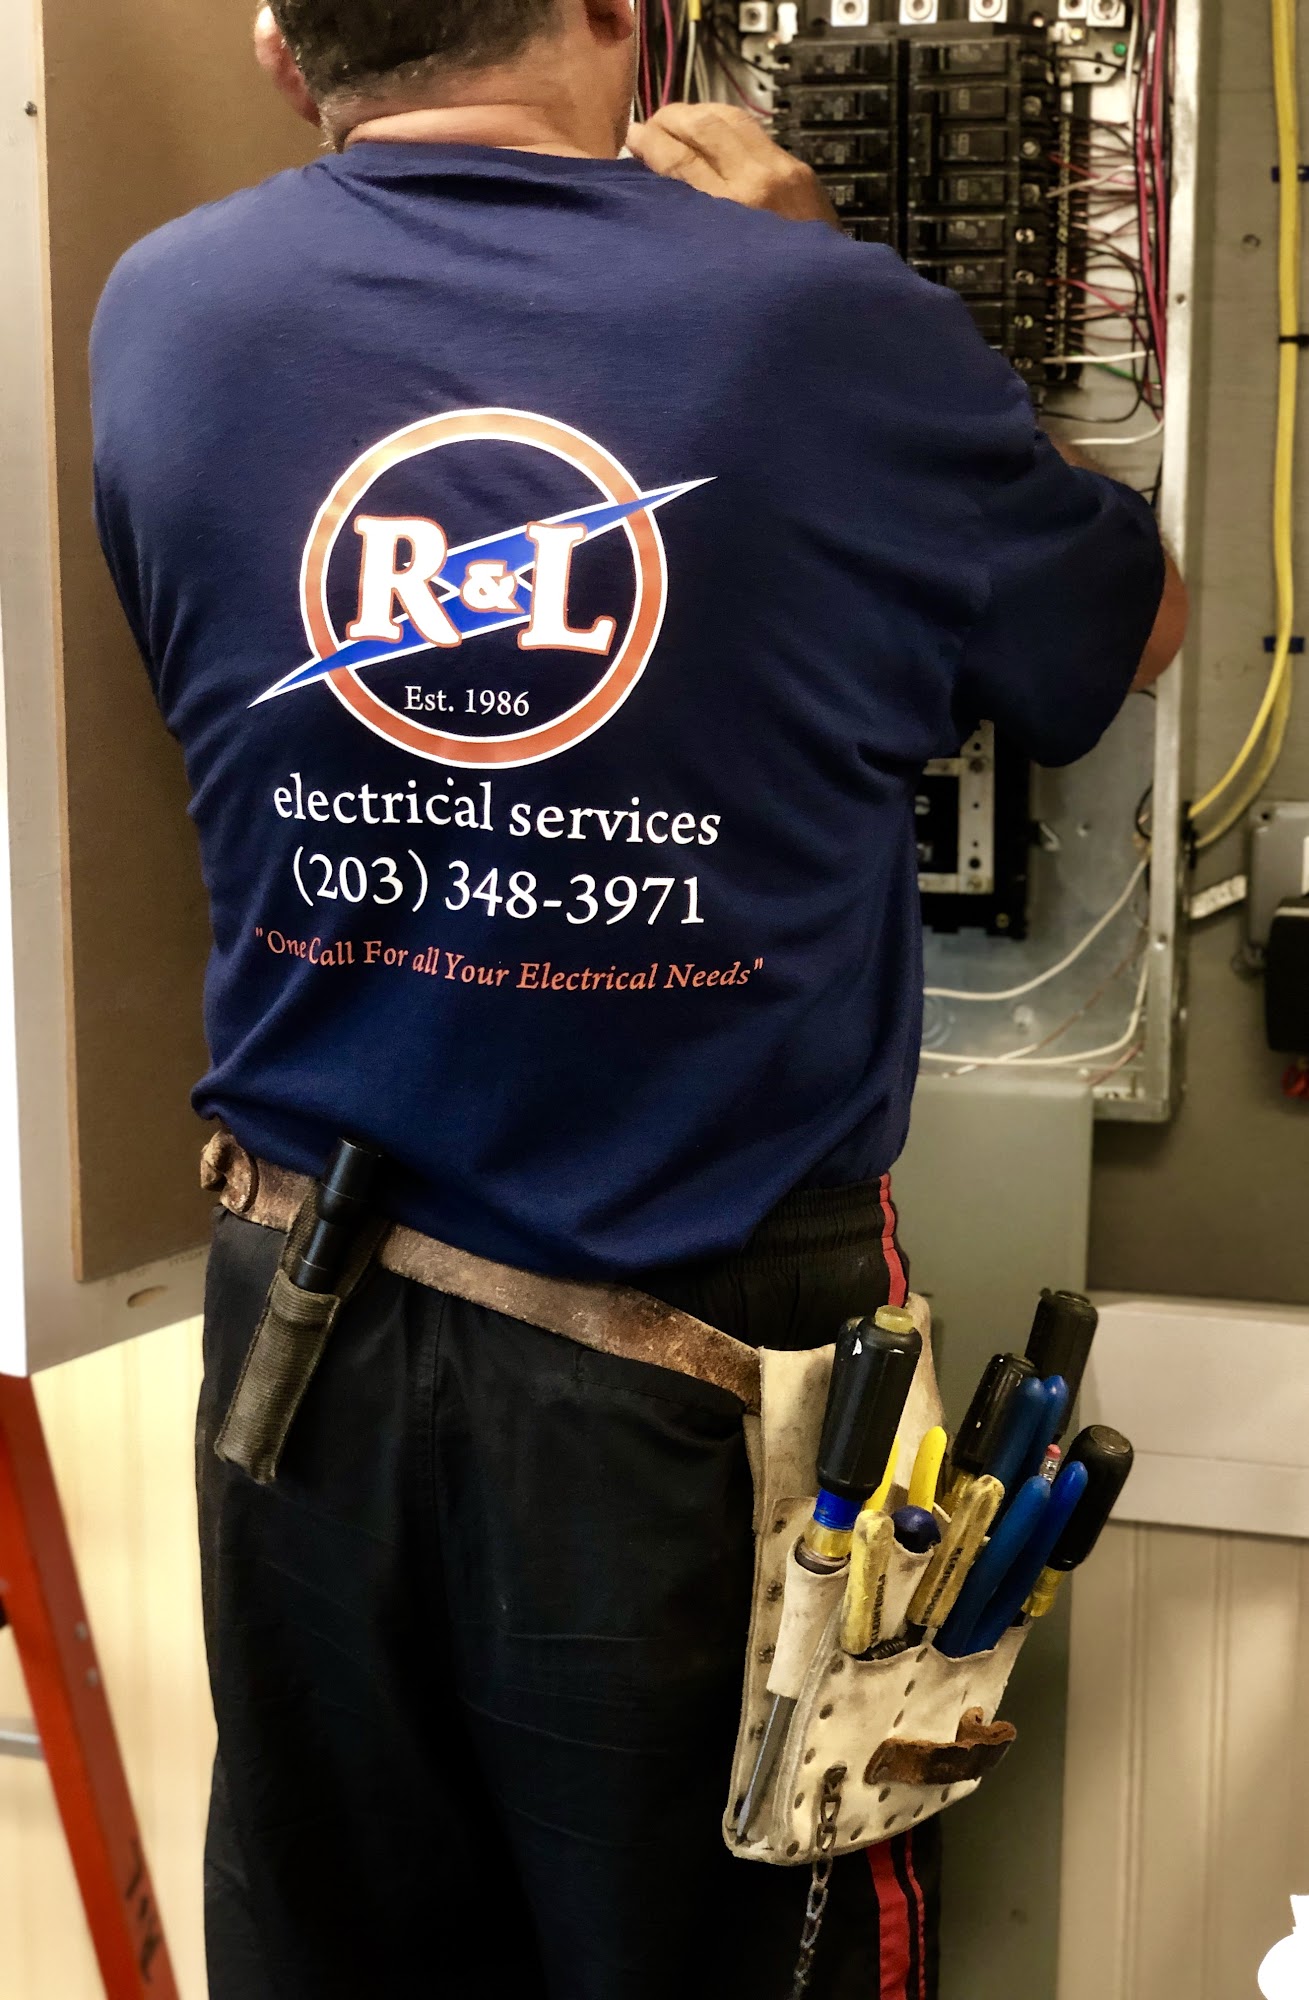 R & L Electrical Services of Ct, LLC